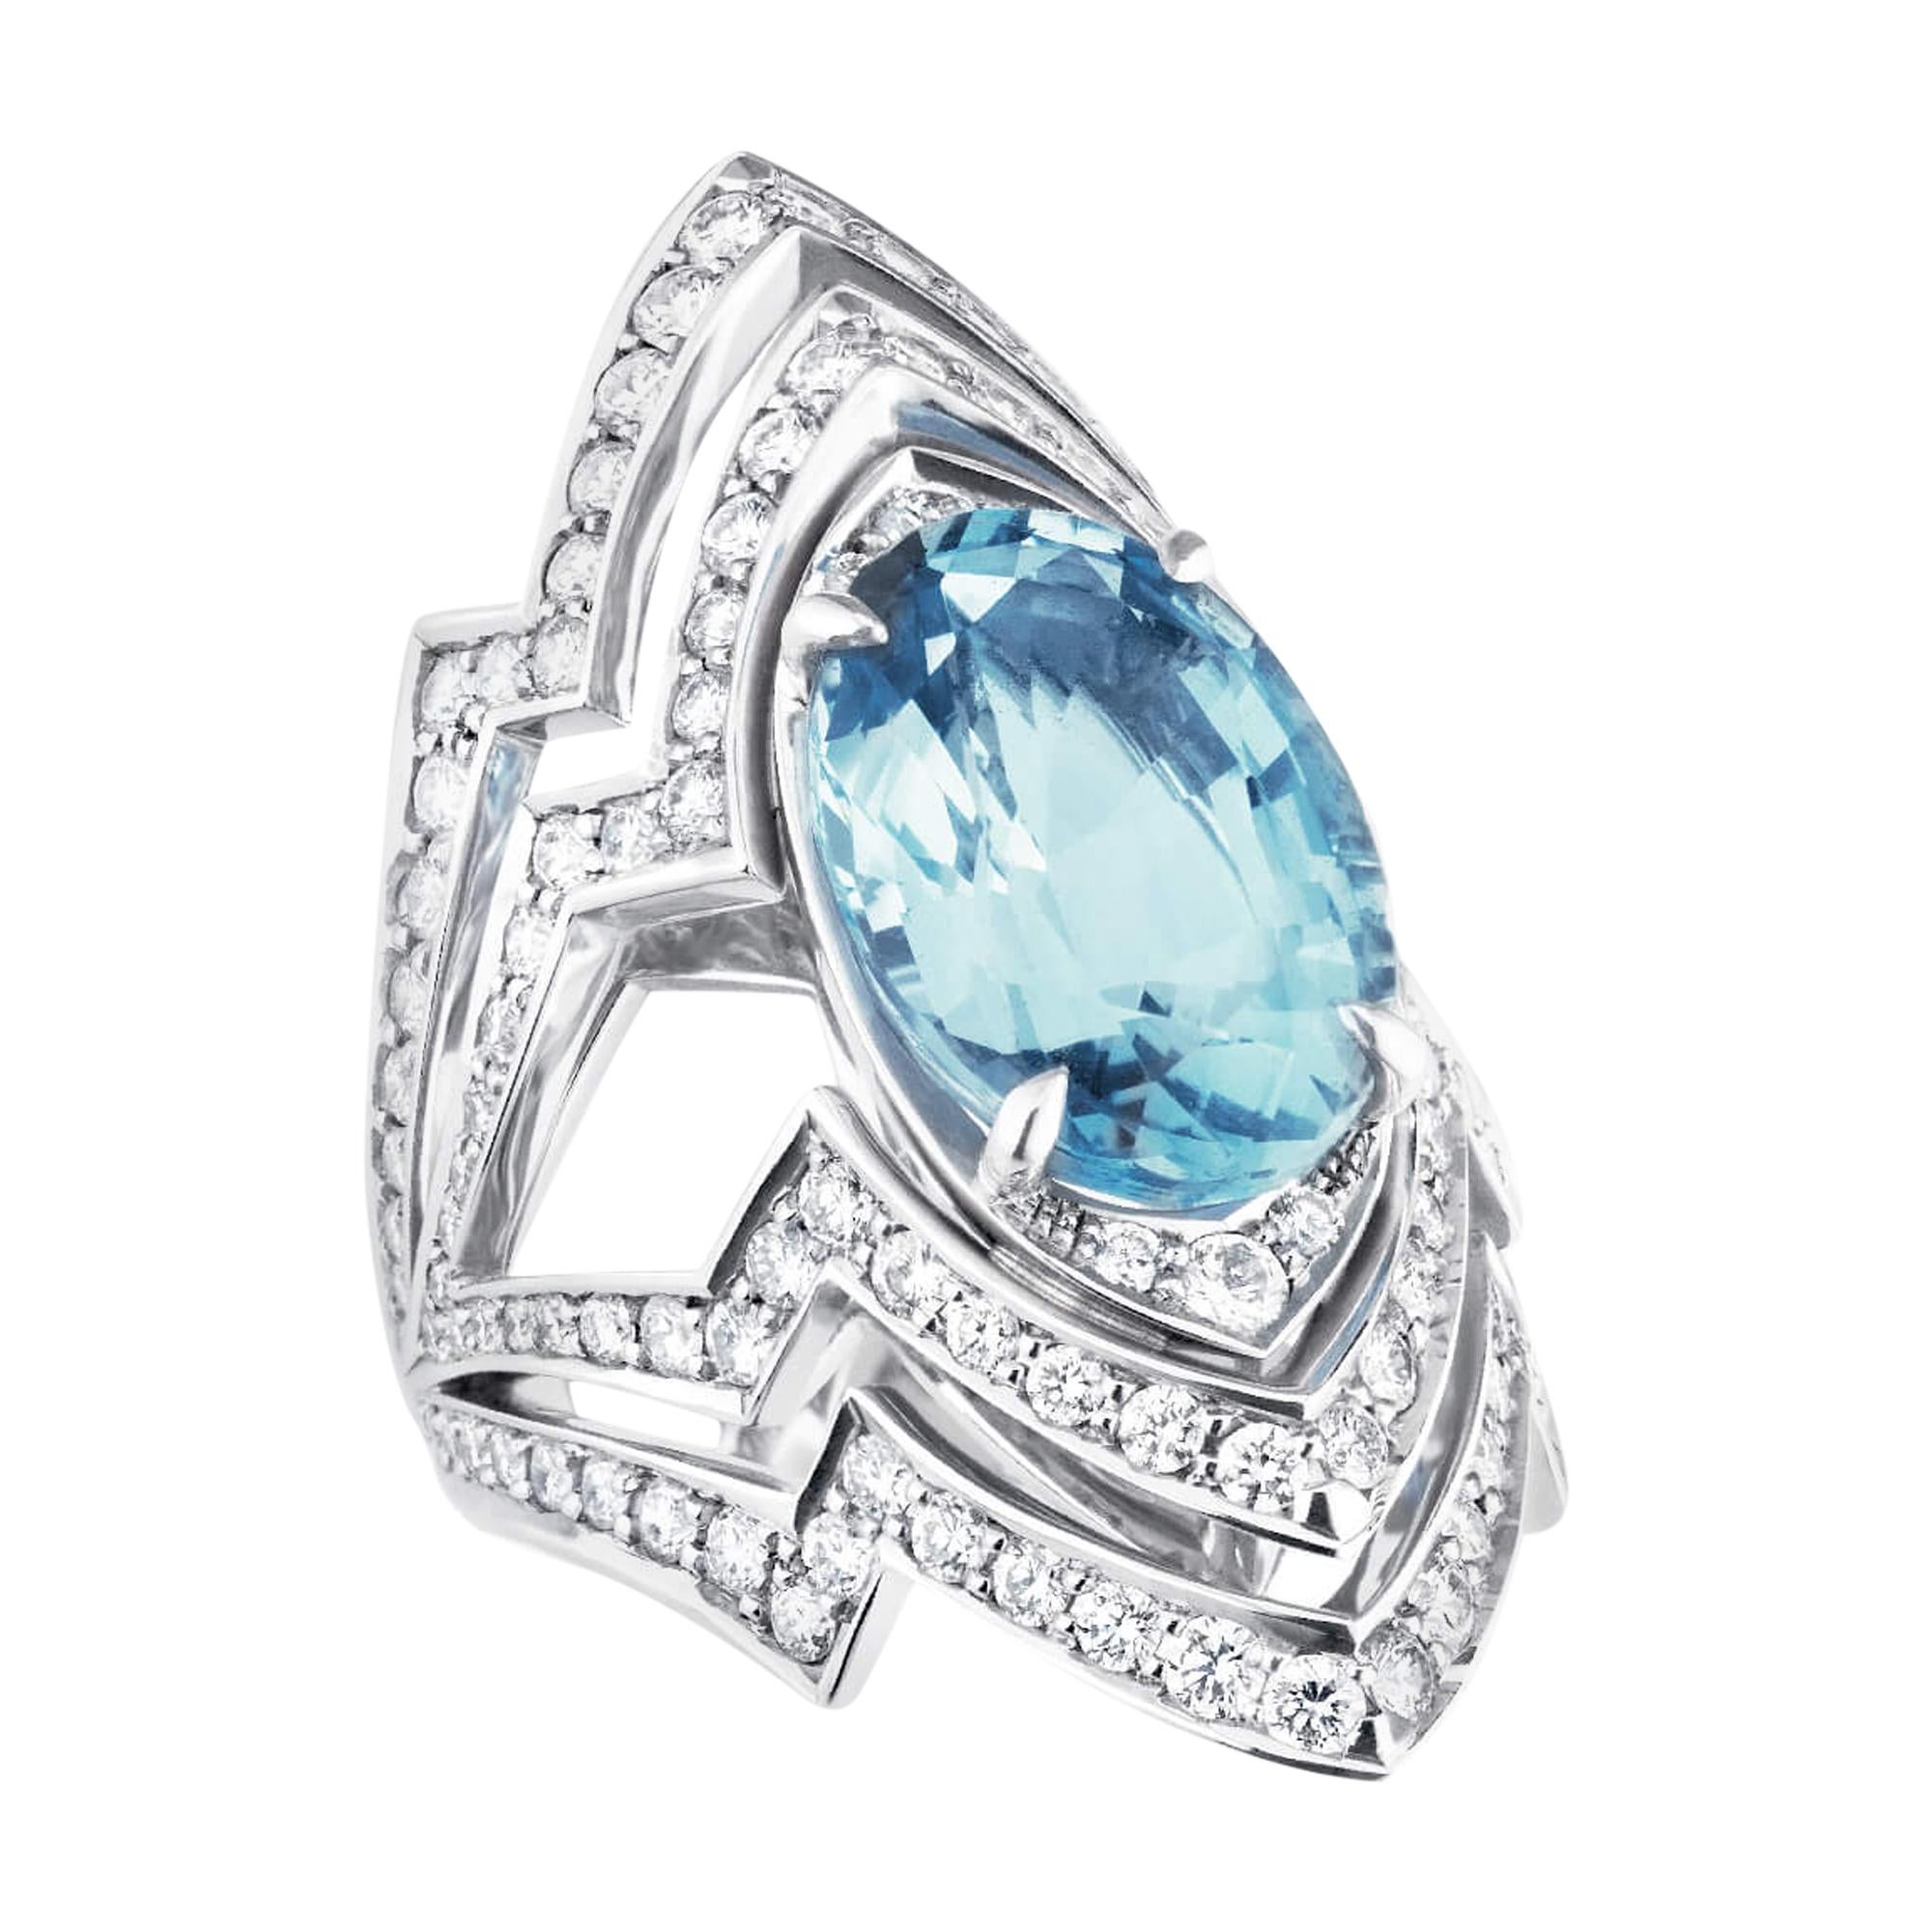 Lady Stardust Aquamarine '6.00cts' and White Diamond '0.89cts' Couture Ring